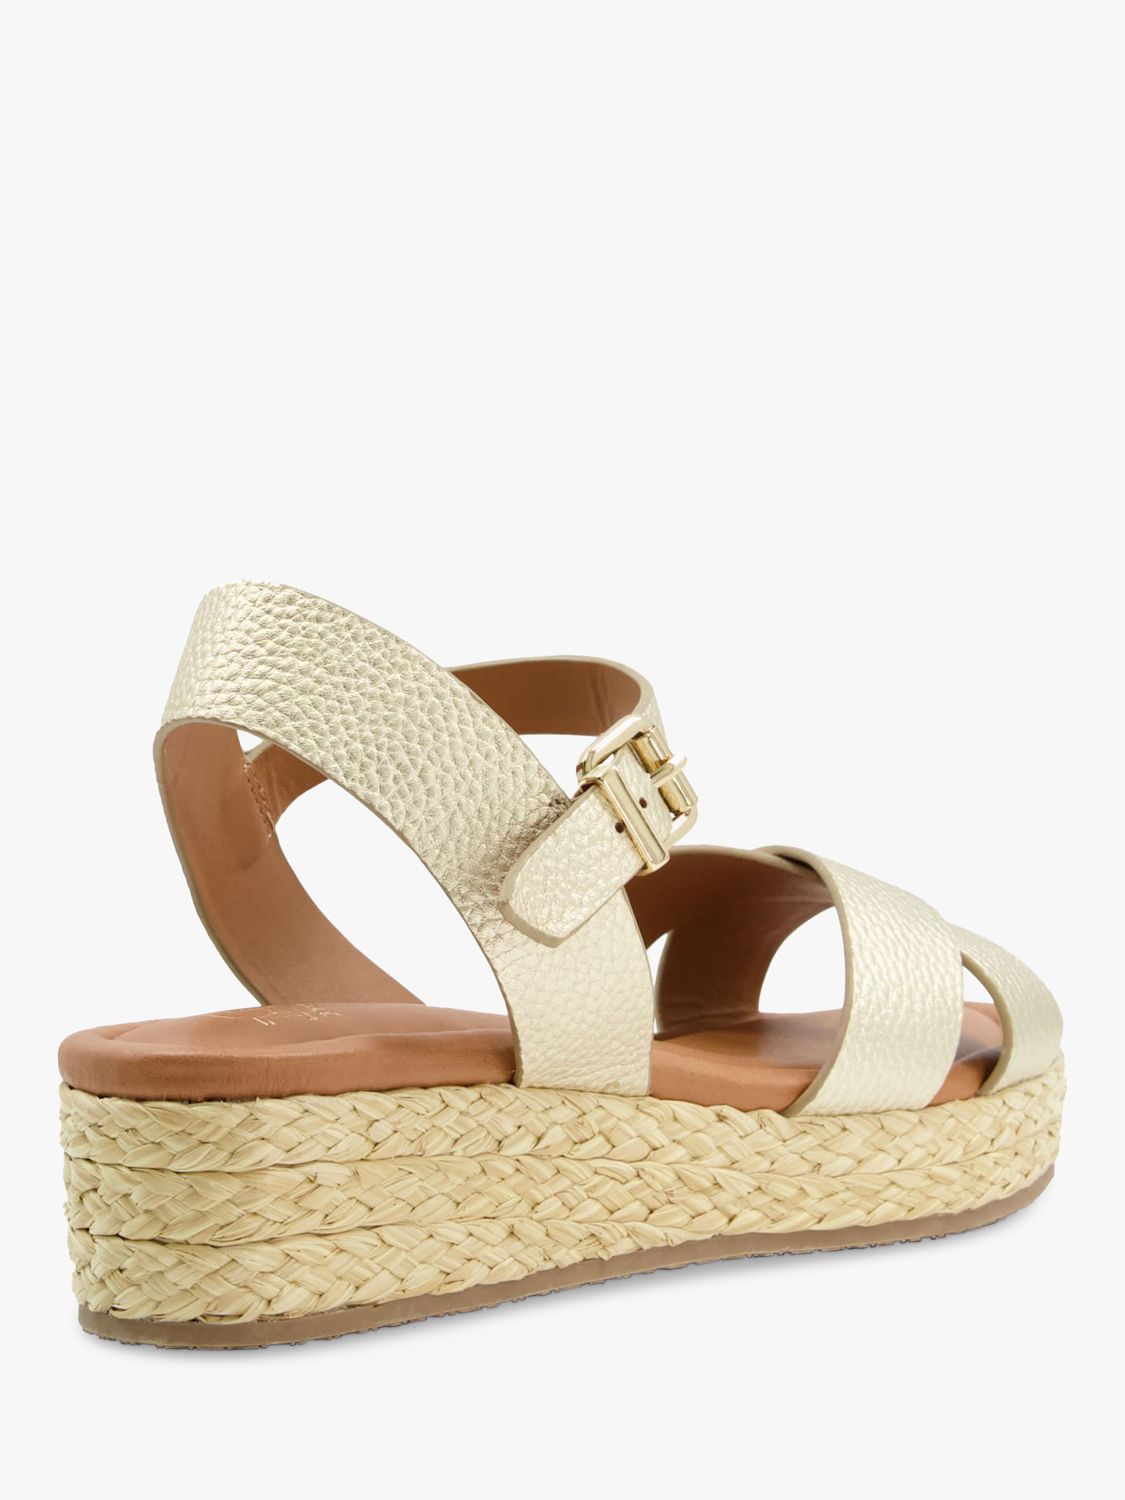 Buy Dune Linnie Leather Cross Strap Sandals, Gold Online at johnlewis.com